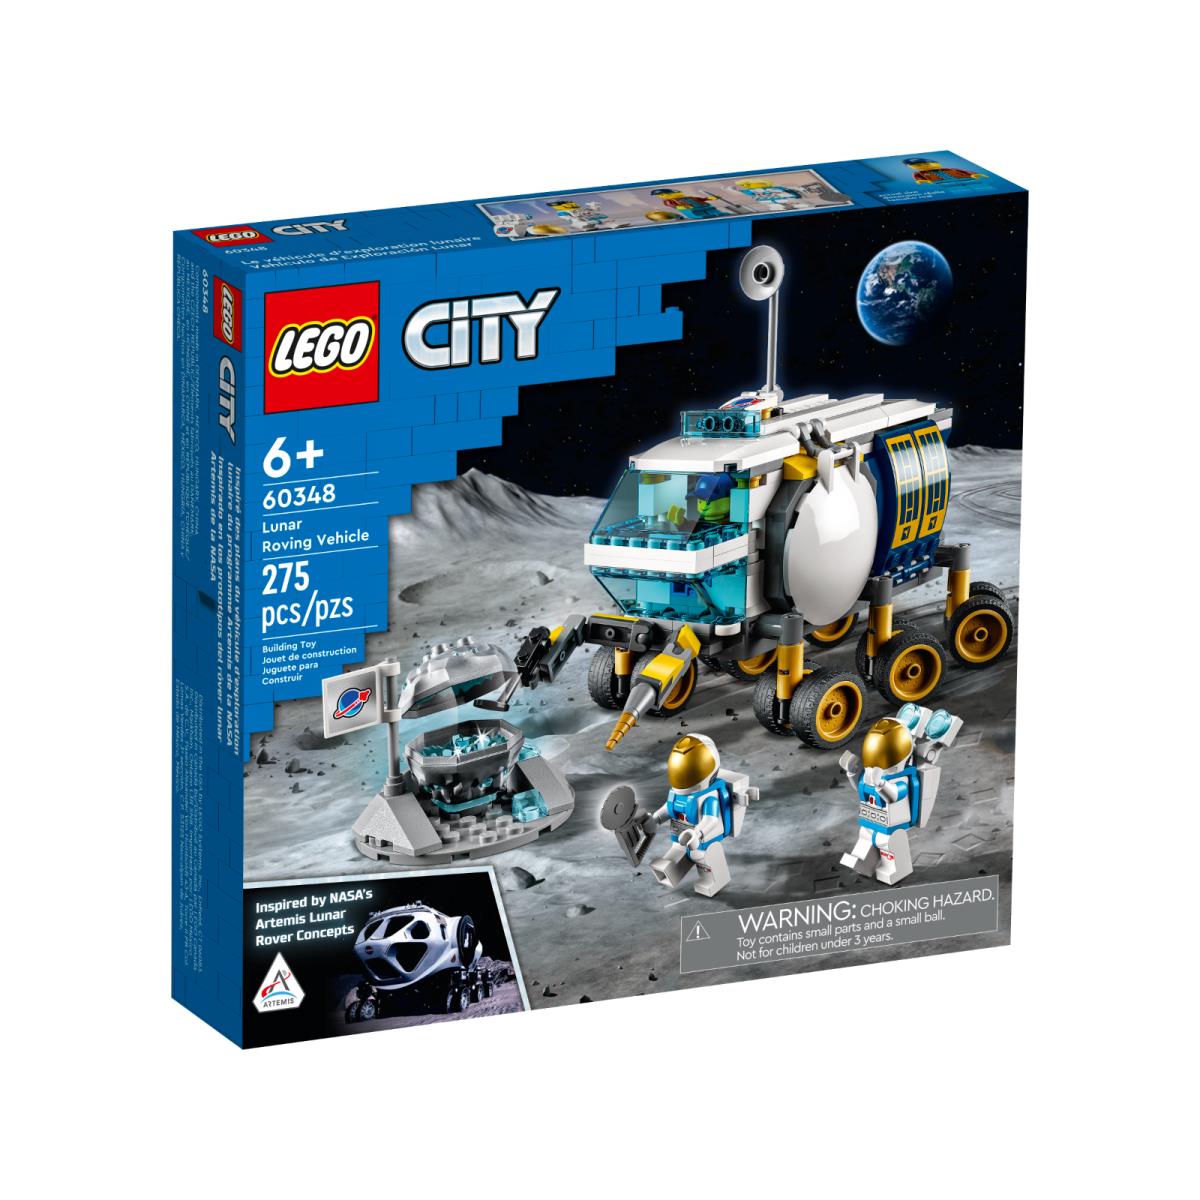 Lego City 60348 Lunar Roving Vehicle Space Toy Building Set